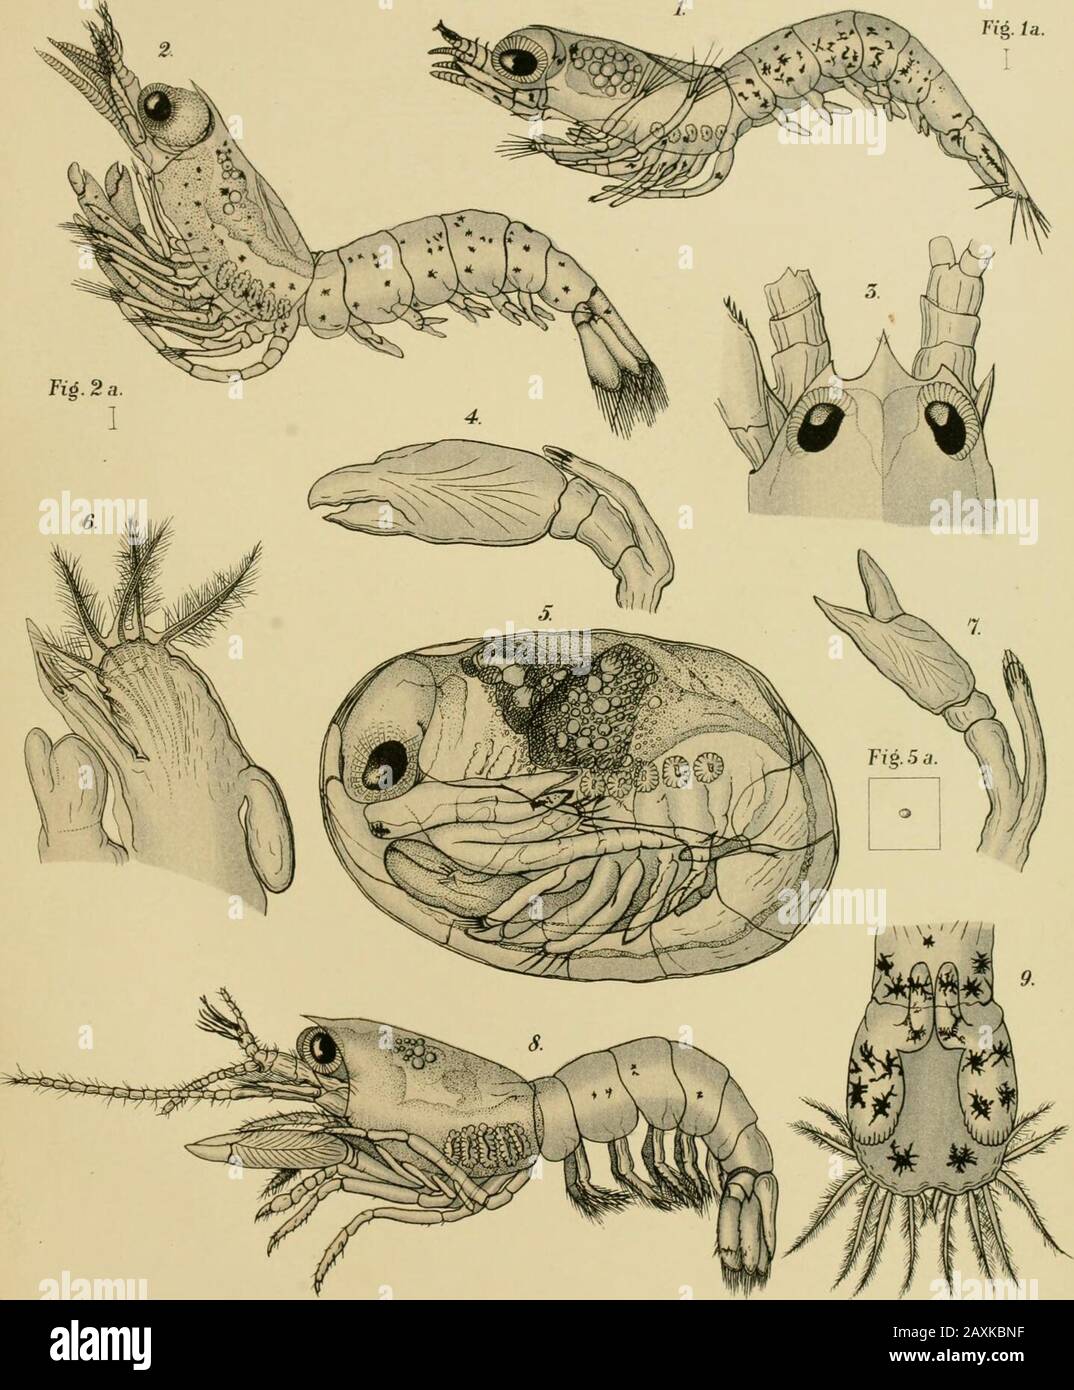 The embryology and metamorphosis of the Macroura . larva. L.=4.Fig. 3. Head of young from same brood. Four days old. x52.Fig. 4. Right first pereioi)od of larva of A. saulcyi, var. brevicarpus, before the molt preparatory to stage shown in Pig. 1. Seen from inner side. x52. Swimming hairs of exopodites rudimentary.Fig. 5. Egg embryo of A. saulcyi, var. longicarjyus, nearly ready to hatch. The large chela of the left first pereiopod is conspicuous below the autenni*. x46.Fig. 5a. To show natural size of the same. Slightly too large. Dimensions: xooXySoiuch.Fig. 6. First and second maxilla of fi Stock Photo